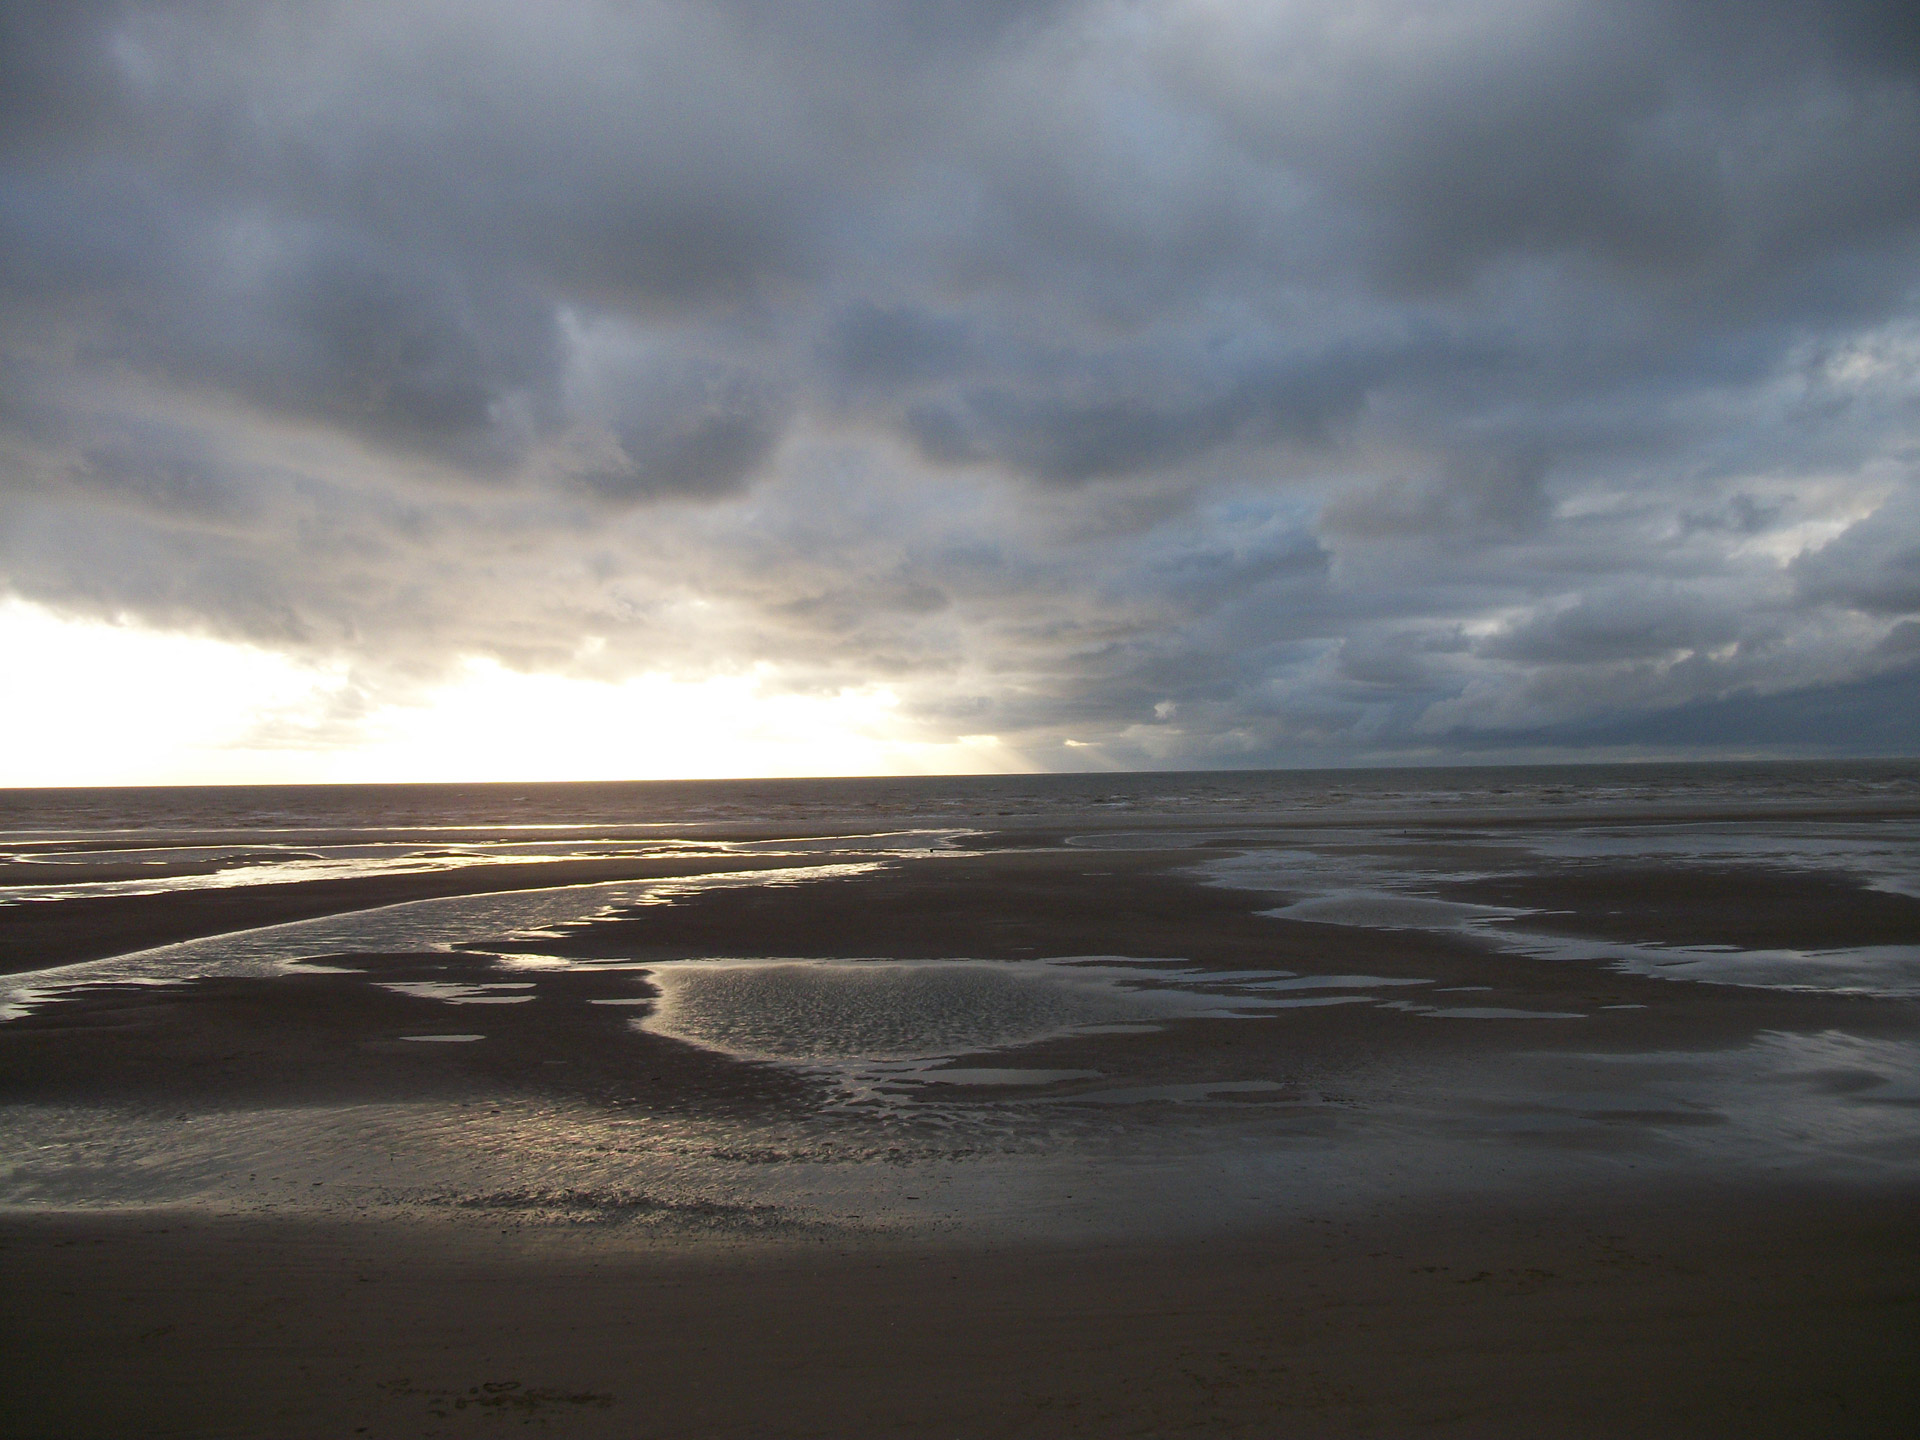 Blackpool beach early in the morning thunder clouds rolling in